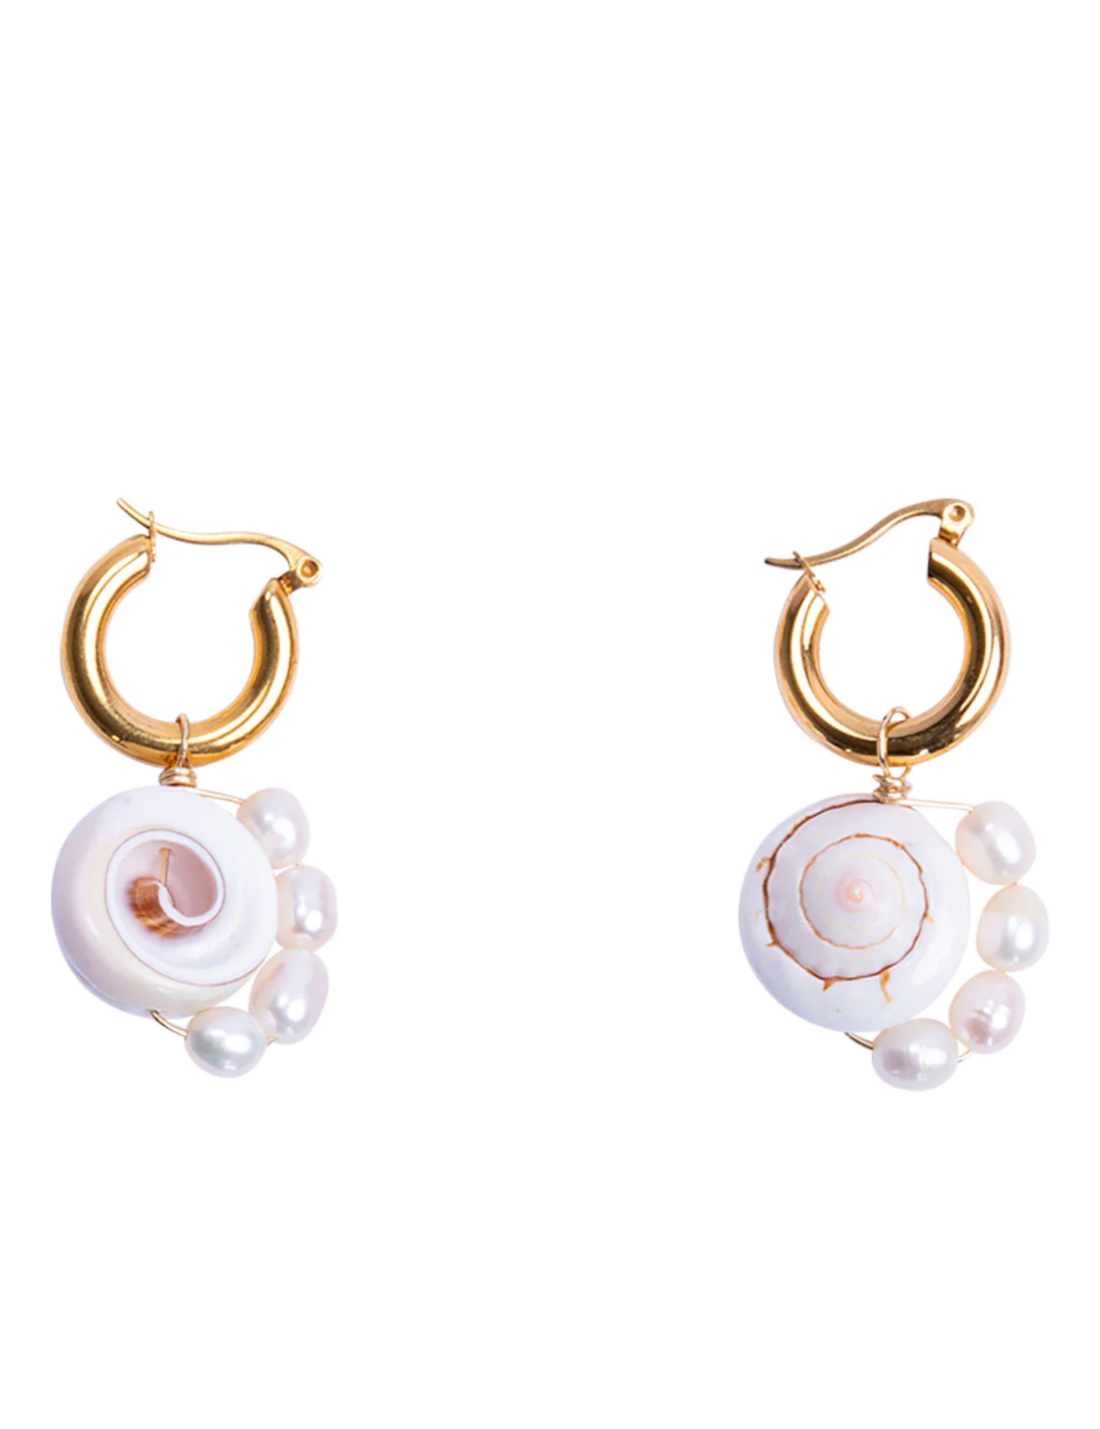 Briwok - Coquilles Earrings: Shell